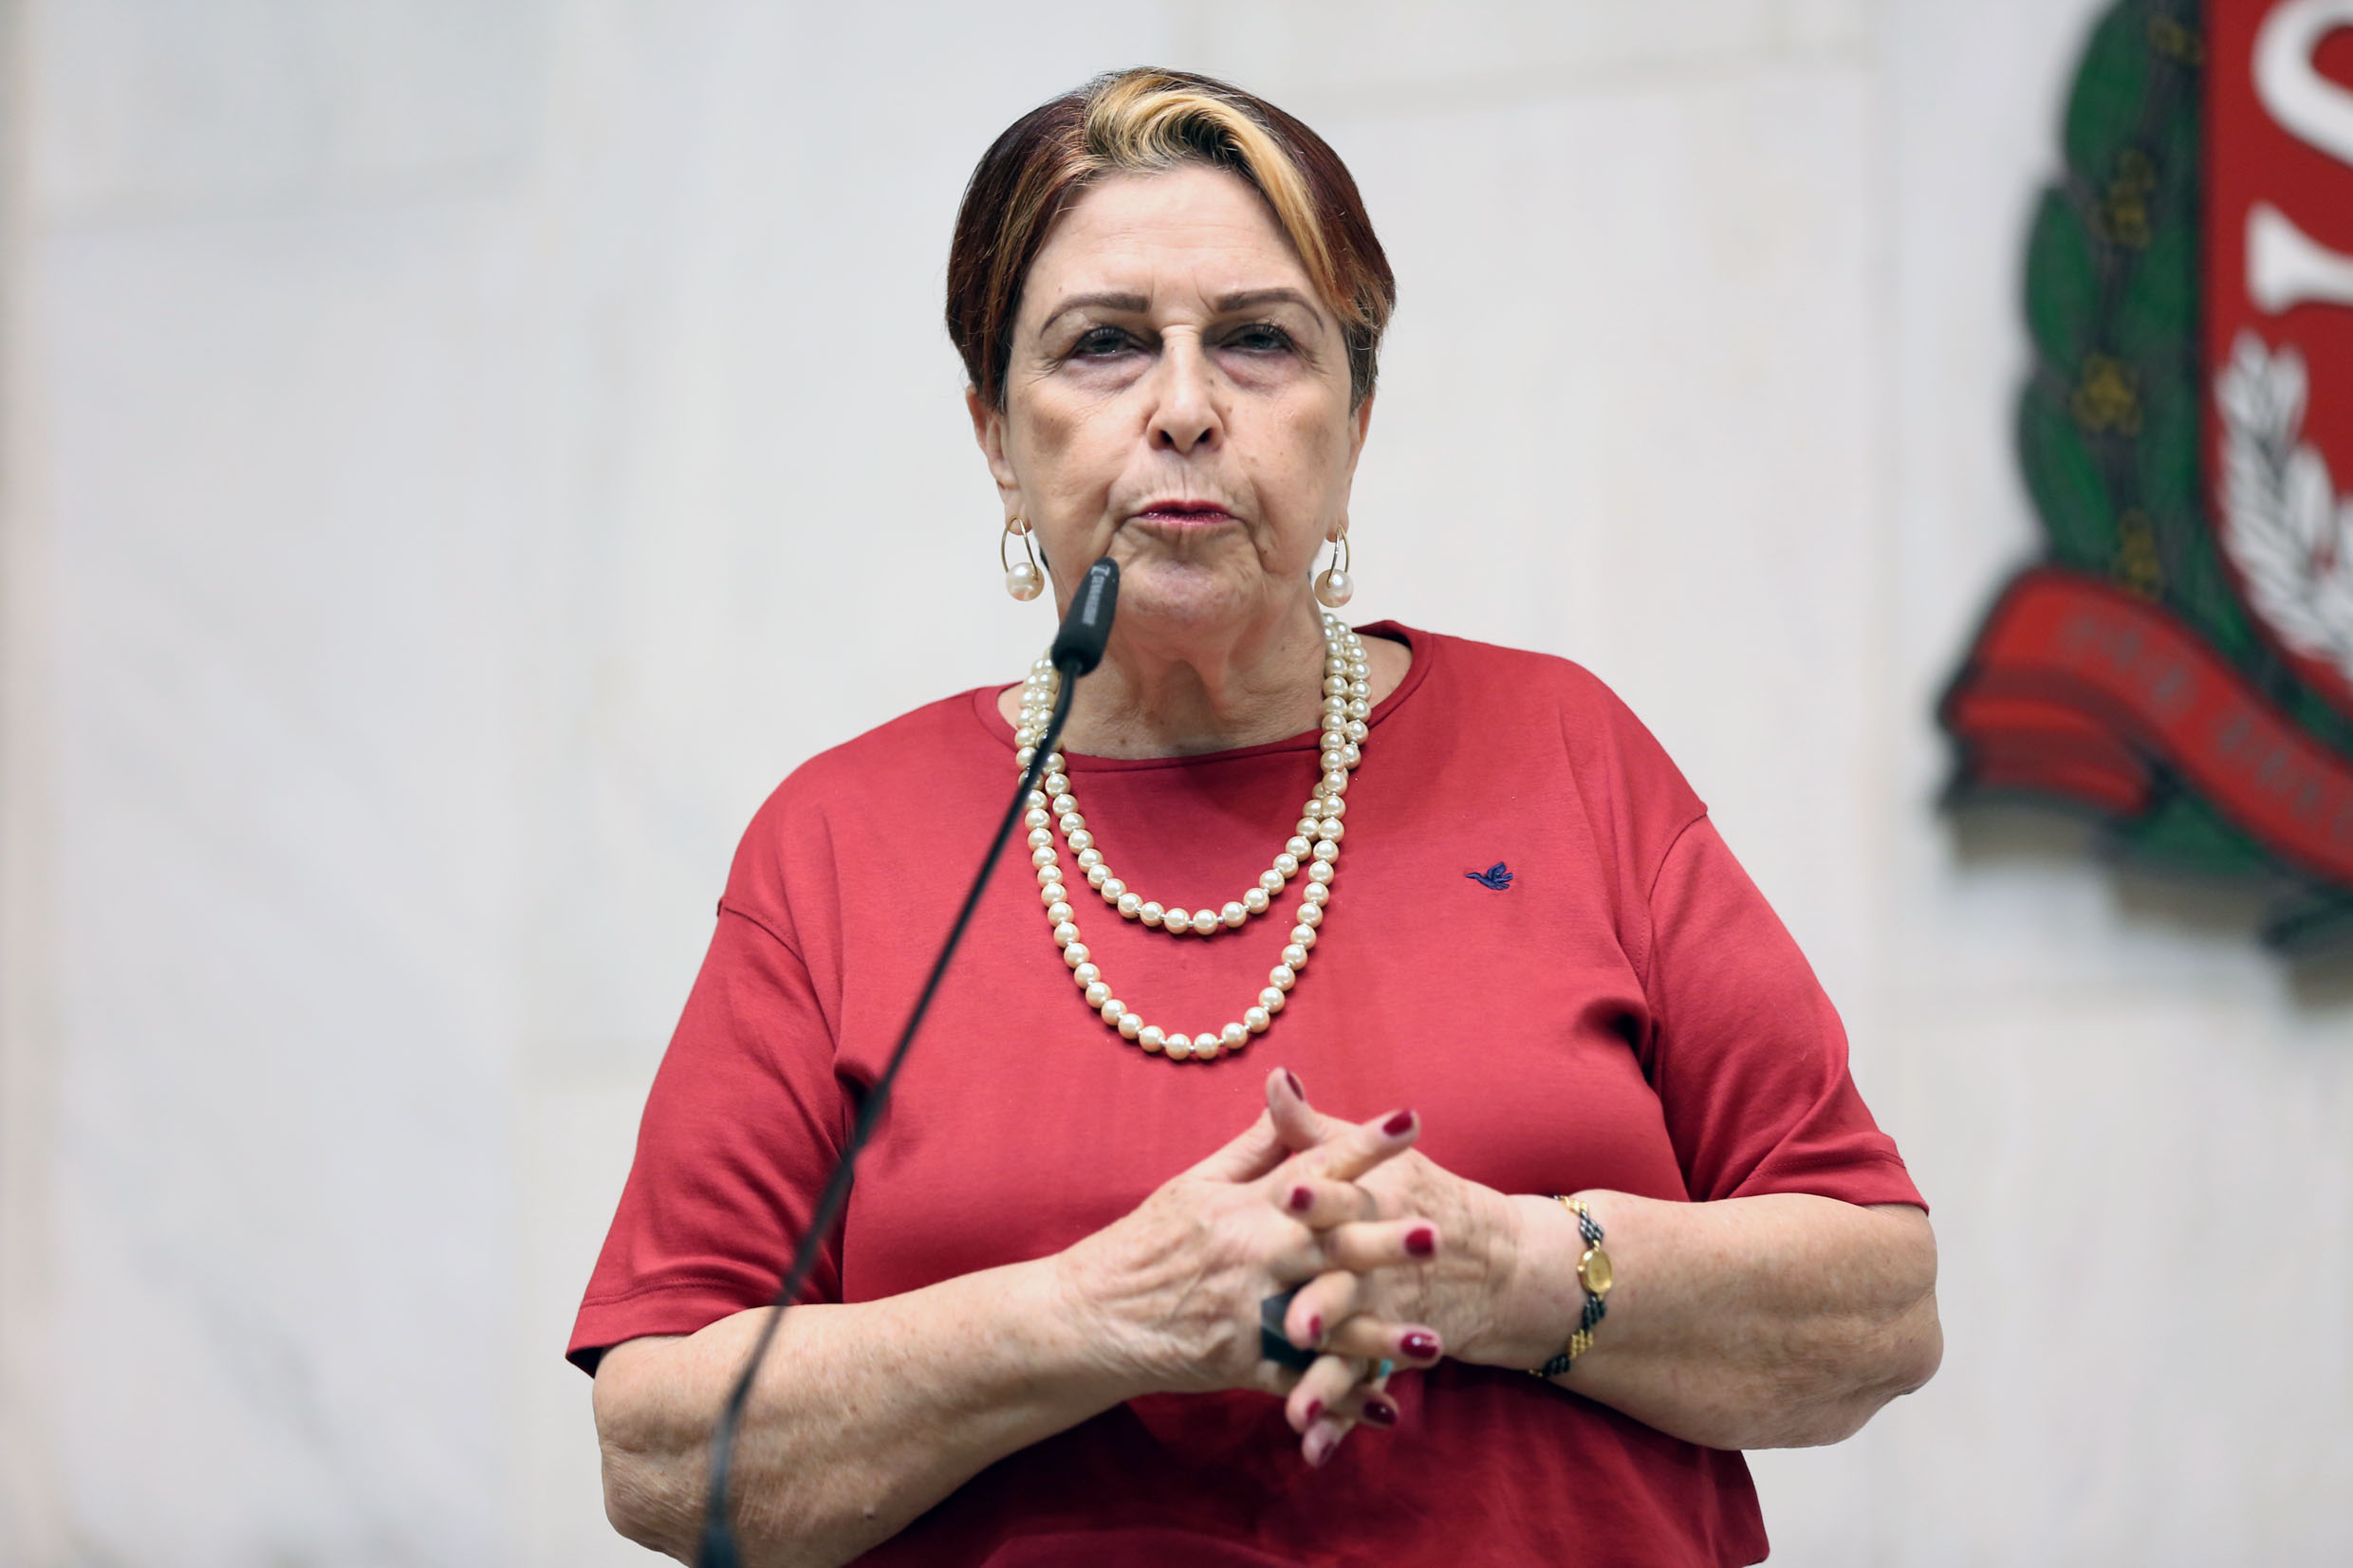 EDNA MACEDO<a style='float:right' href='https://www3.al.sp.gov.br/repositorio/noticia/N-12-2019/fg245518.jpg' target=_blank><img src='/_img/material-file-download-white.png' width='14px' alt='Clique para baixar a imagem'></a>